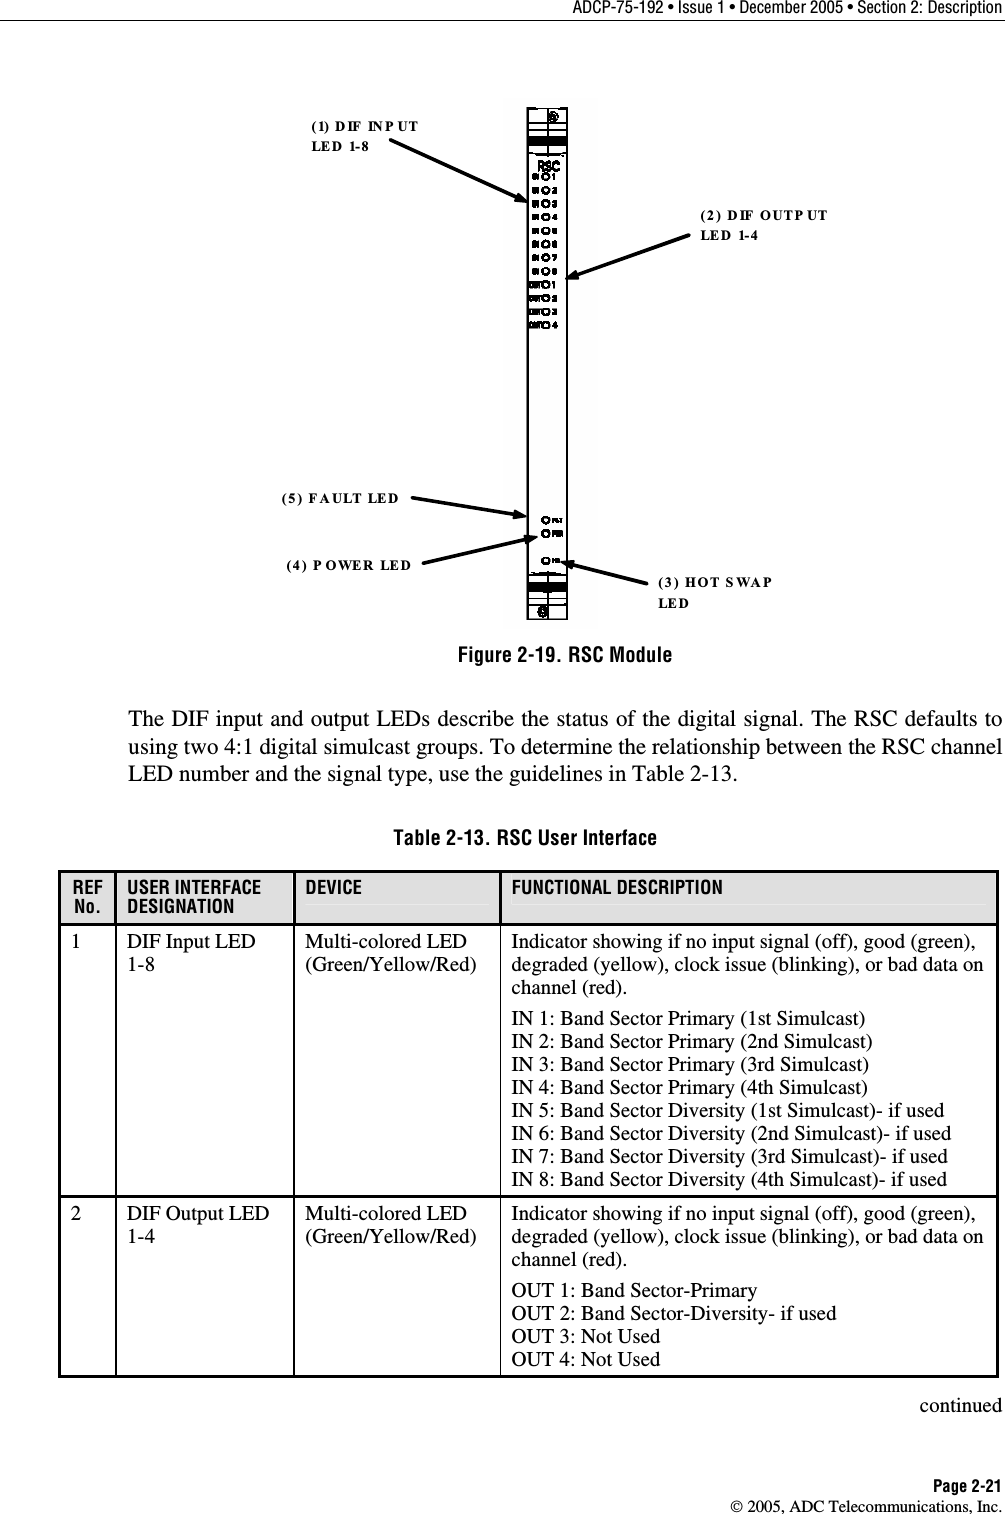 ADCP-75-192 • Issue 1 • December 2005 • Section 2: Description Page 2-21  2005, ADC Telecommunications, Inc. (5) FAULT LED(3) HOT SWAP  LE D(4) P OWER LED(1) DIF INP UT LE D  1- 8(2) DIF OUTP UT LE D  1- 4 Figure 2-19. RSC Module The DIF input and output LEDs describe the status of the digital signal. The RSC defaults to using two 4:1 digital simulcast groups. To determine the relationship between the RSC channel LED number and the signal type, use the guidelines in Table 2-13.  Table 2-13. RSC User Interface REFNo. USER INTERFACE DESIGNATION DEVICE  FUNCTIONAL DESCRIPTION 1  DIF Input LED 1-8 Multi-colored LED (Green/Yellow/Red)  Indicator showing if no input signal (off), good (green), degraded (yellow), clock issue (blinking), or bad data on channel (red). IN 1: Band Sector Primary (1st Simulcast) IN 2: Band Sector Primary (2nd Simulcast) IN 3: Band Sector Primary (3rd Simulcast) IN 4: Band Sector Primary (4th Simulcast) IN 5: Band Sector Diversity (1st Simulcast)- if used IN 6: Band Sector Diversity (2nd Simulcast)- if used IN 7: Band Sector Diversity (3rd Simulcast)- if used IN 8: Band Sector Diversity (4th Simulcast)- if used 2  DIF Output LED 1-4 Multi-colored LED (Green/Yellow/Red)  Indicator showing if no input signal (off), good (green), degraded (yellow), clock issue (blinking), or bad data on channel (red). OUT 1: Band Sector-Primary OUT 2: Band Sector-Diversity- if used OUT 3: Not Used OUT 4: Not Used continued 